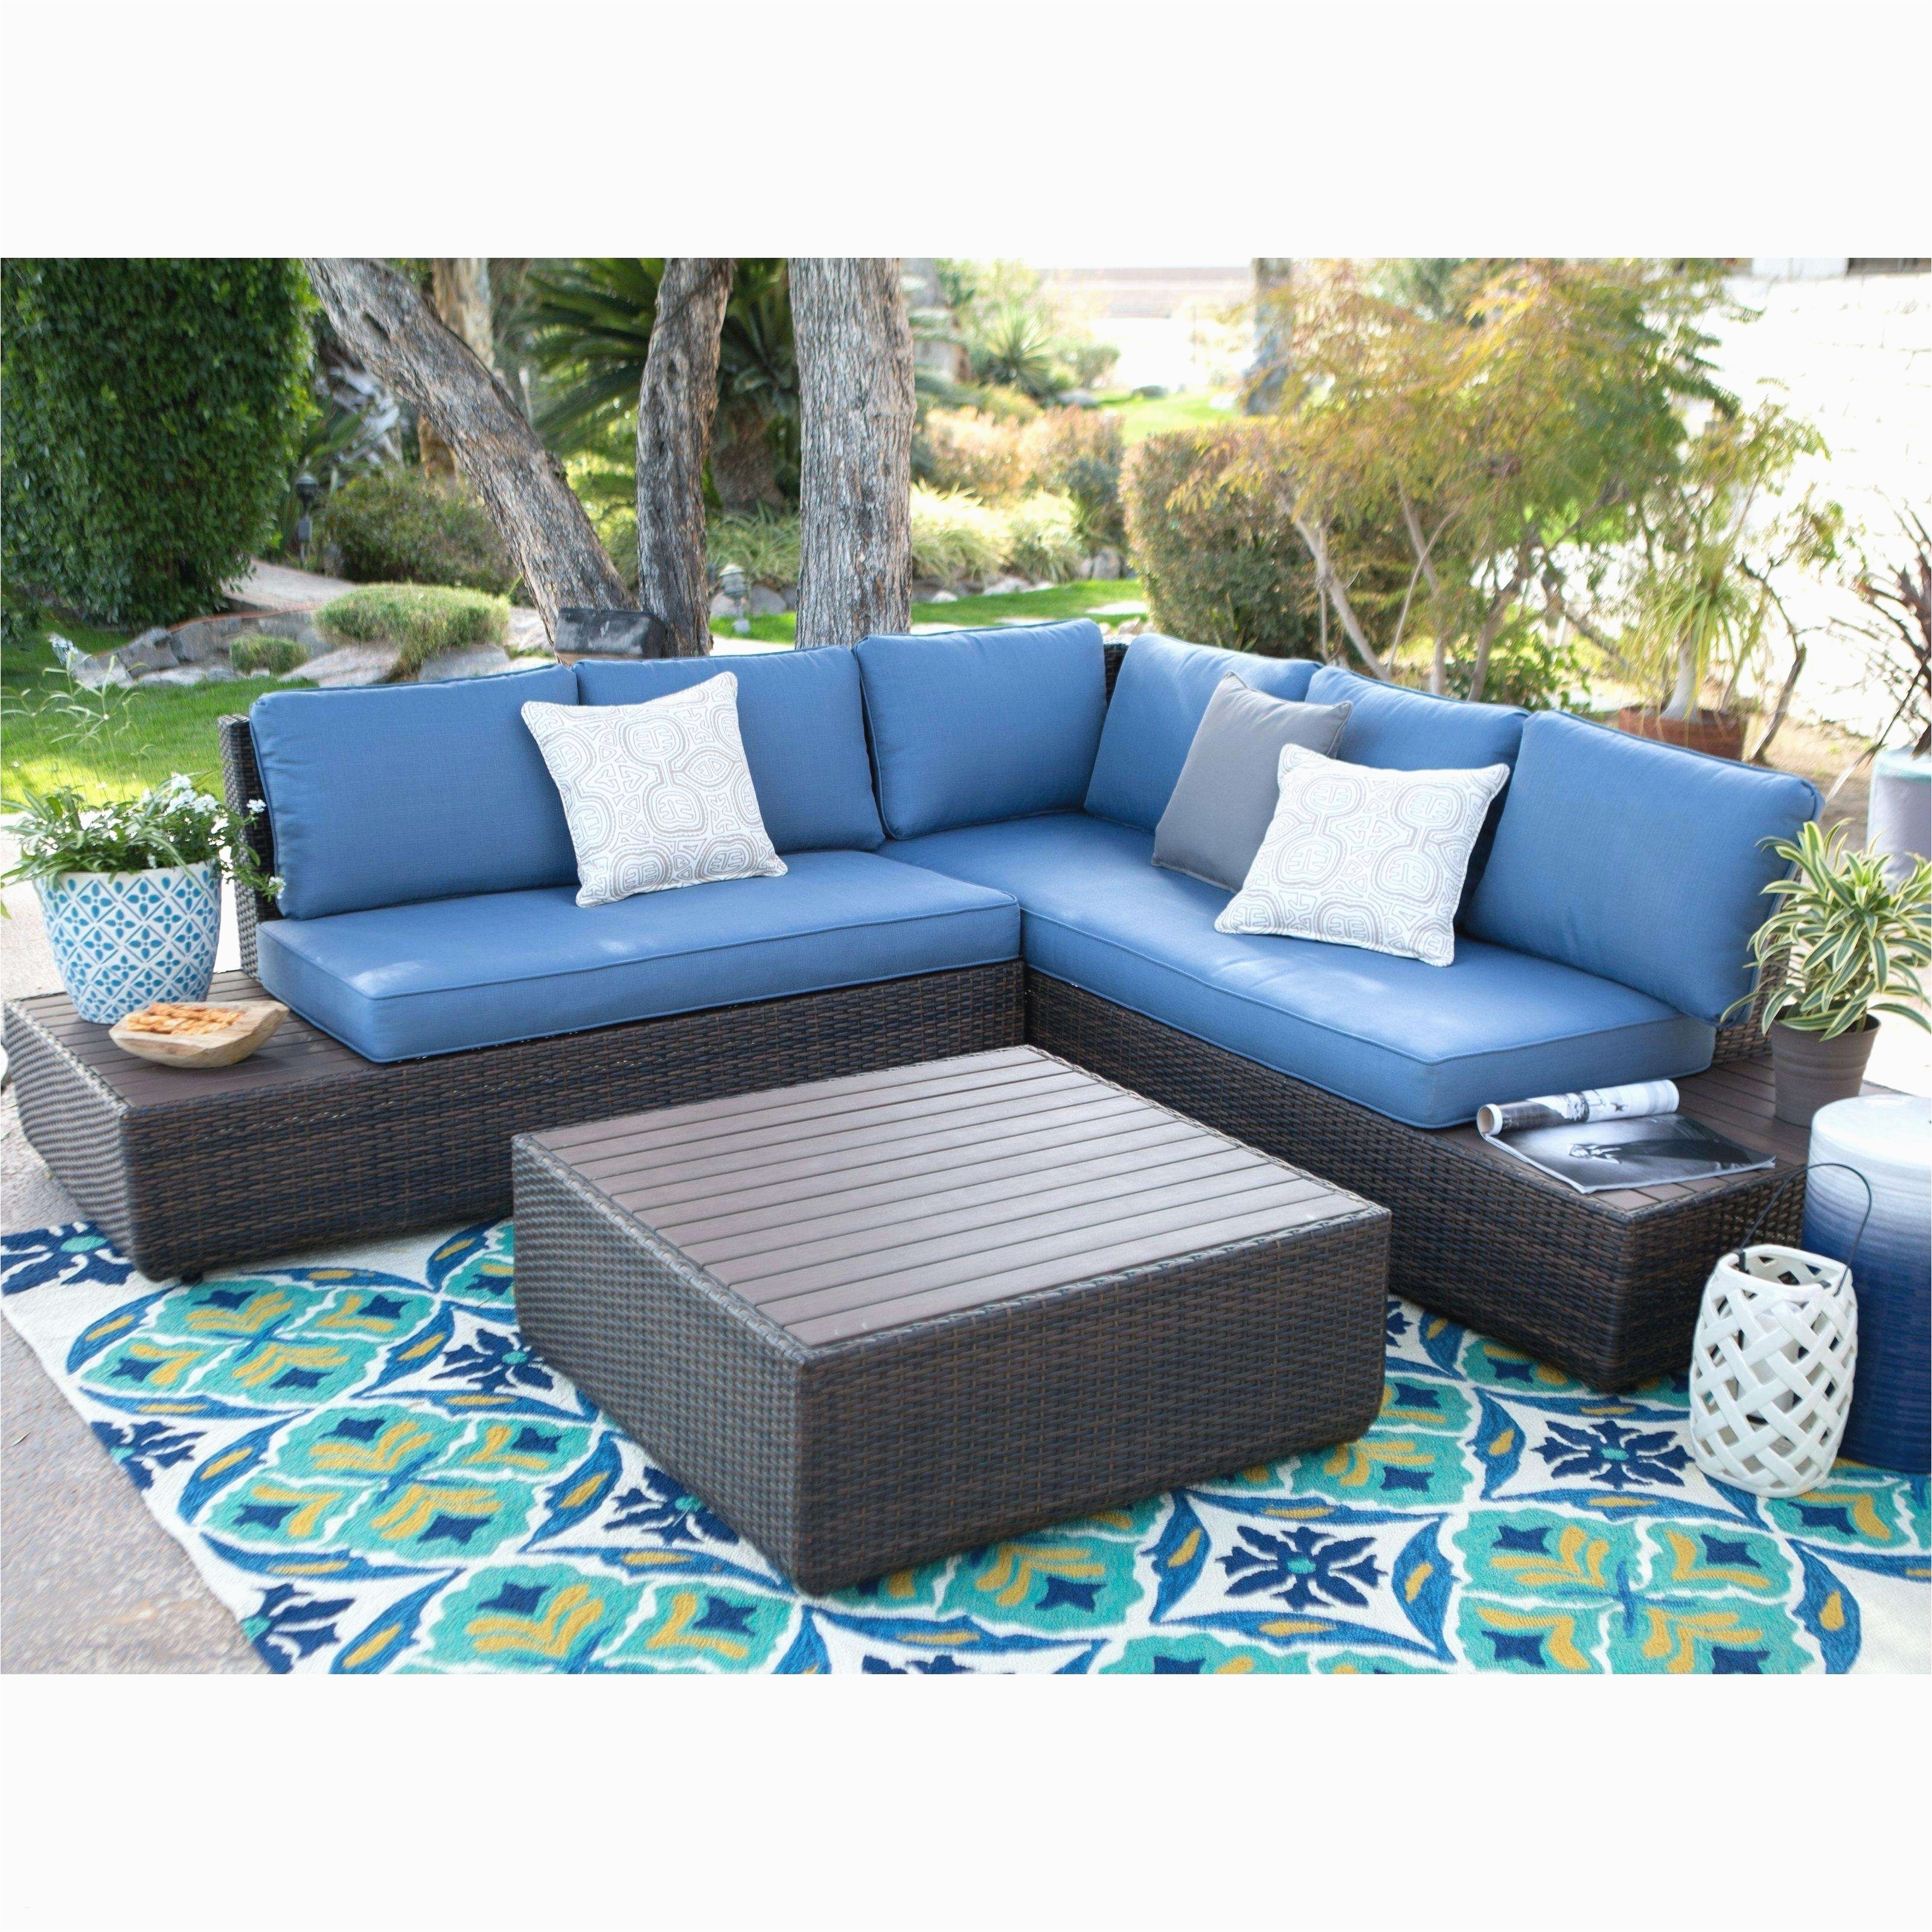 costco outdoor patio furniture awesome patio bench cushions unique wicker outdoor sofa 0d patio chairs sale